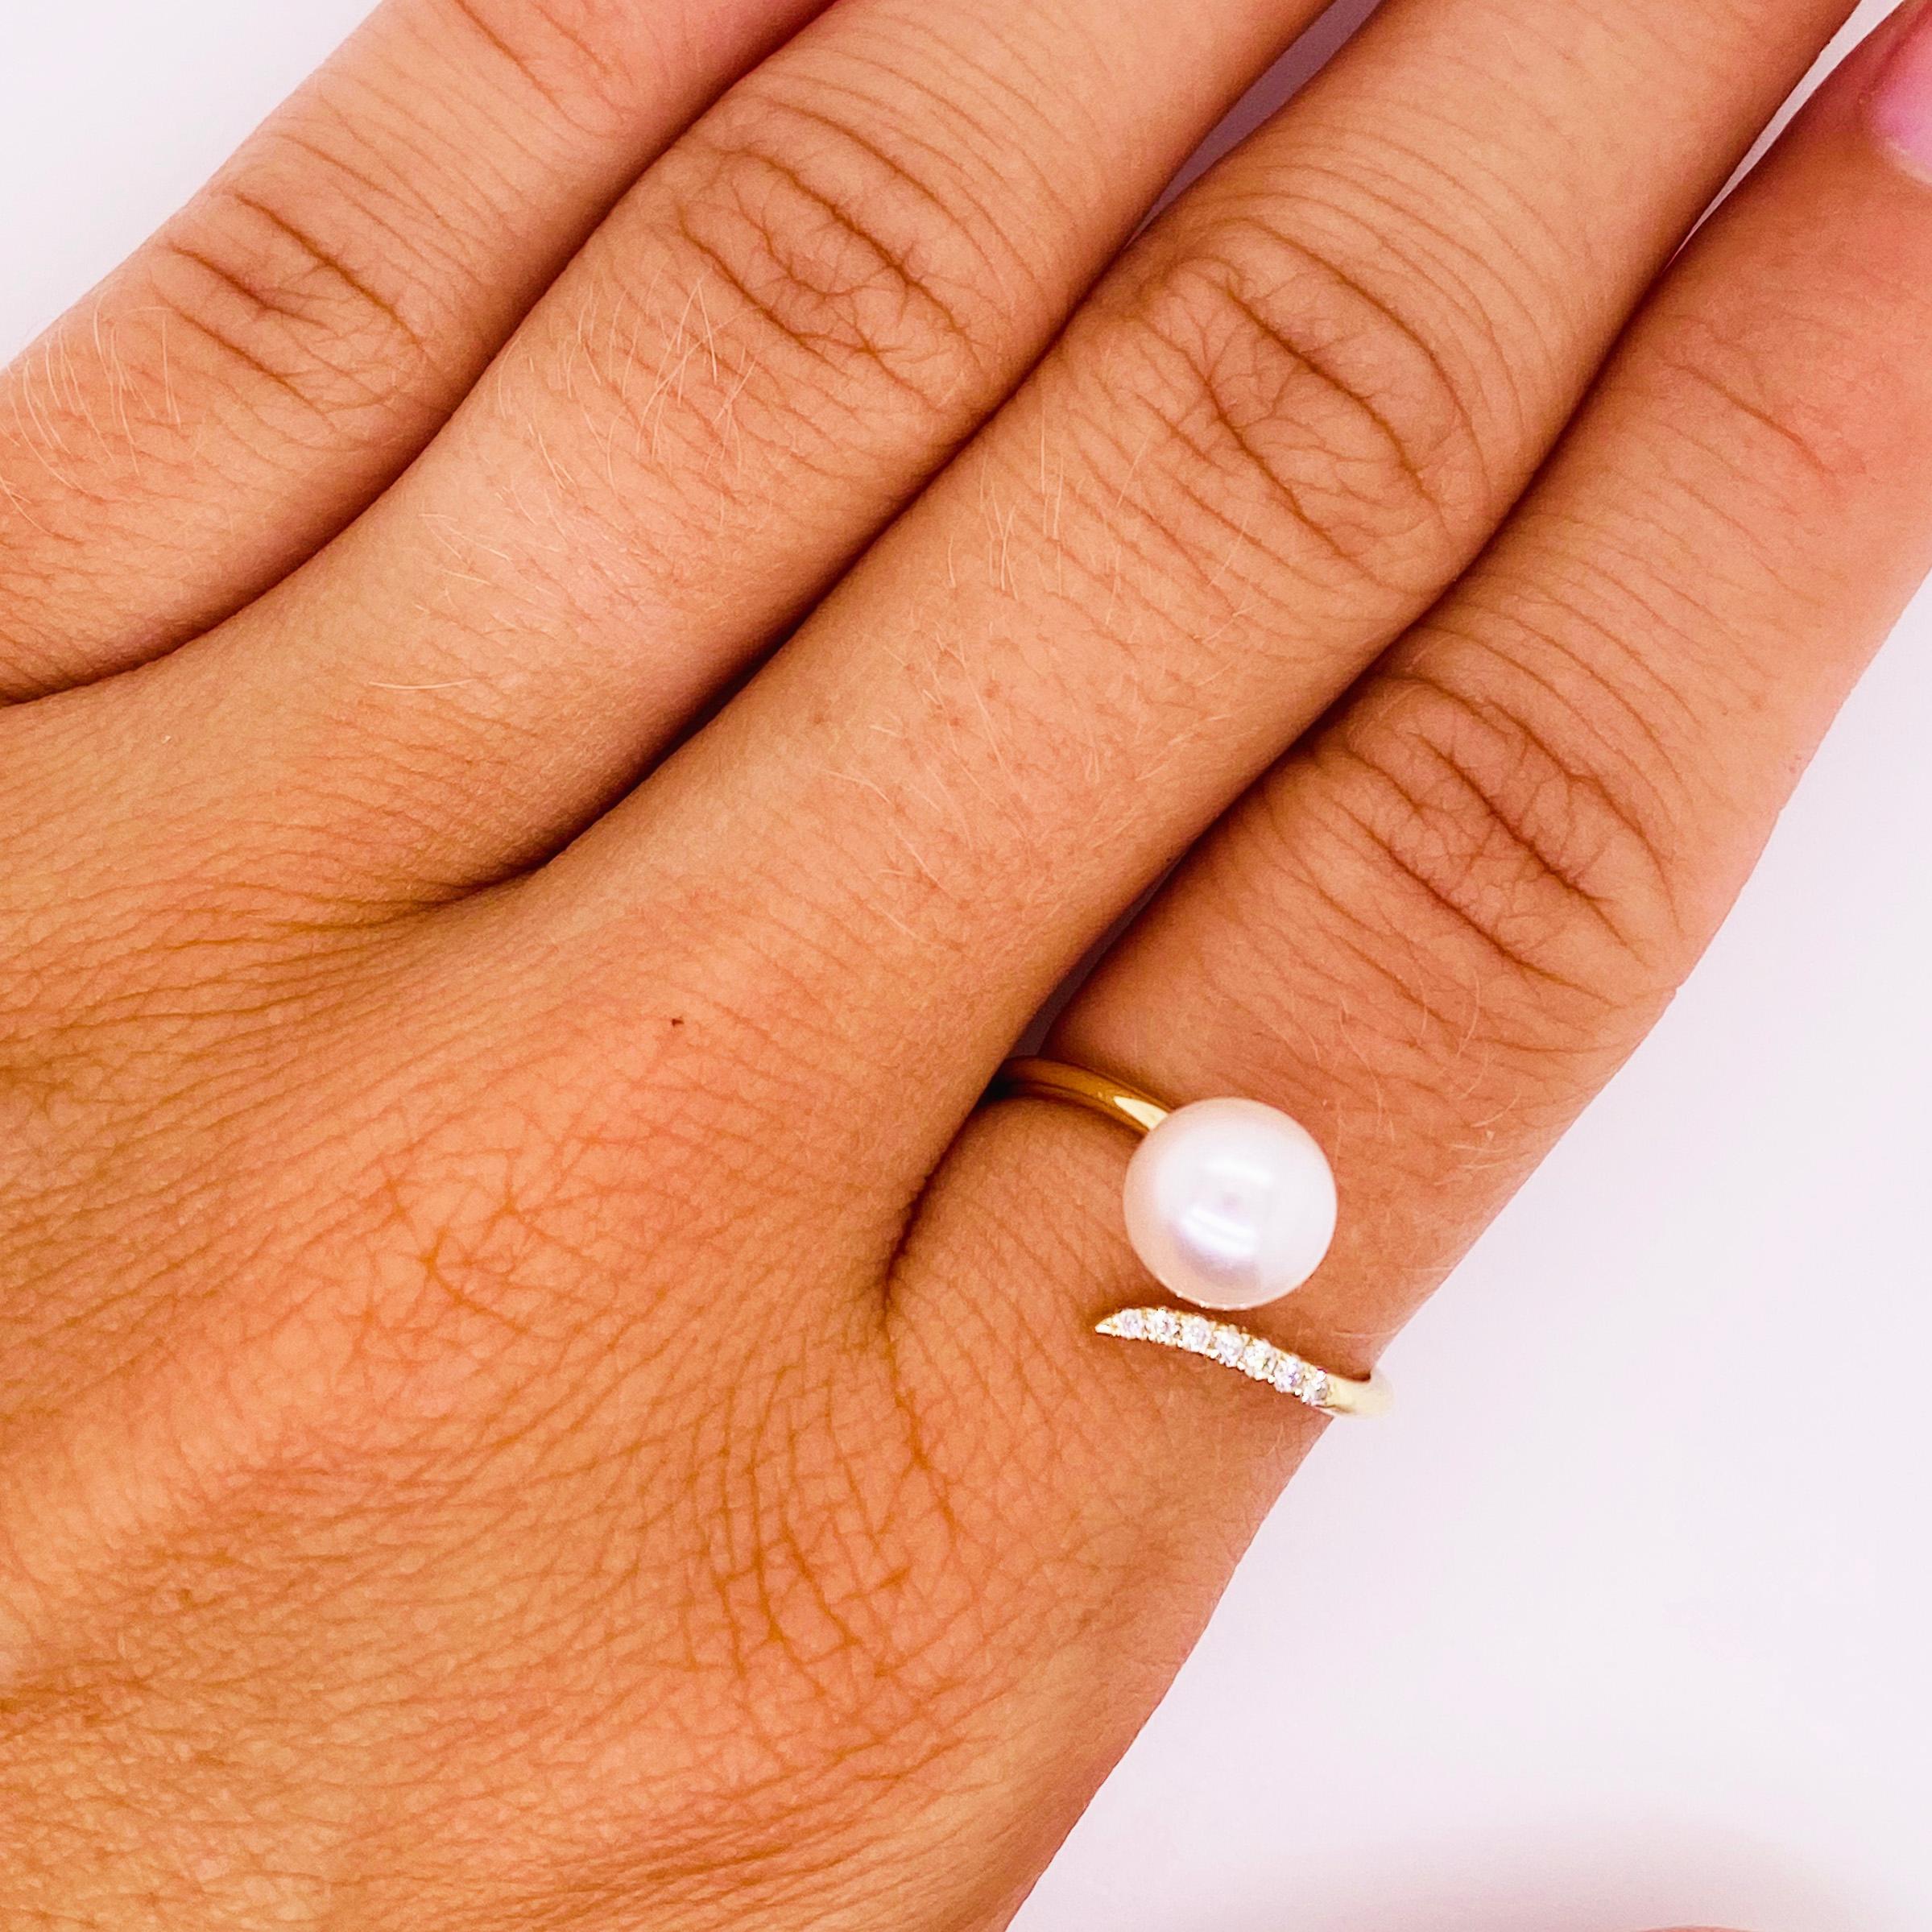 This authentic pearl and diamond ring was designed so that it swirls on the finger.  One side of the negative space ring has seven full cut diamonds, the other side has a 7 millimeter pearl.  The pearl is a genuine, cultured, Japanese, saltwater